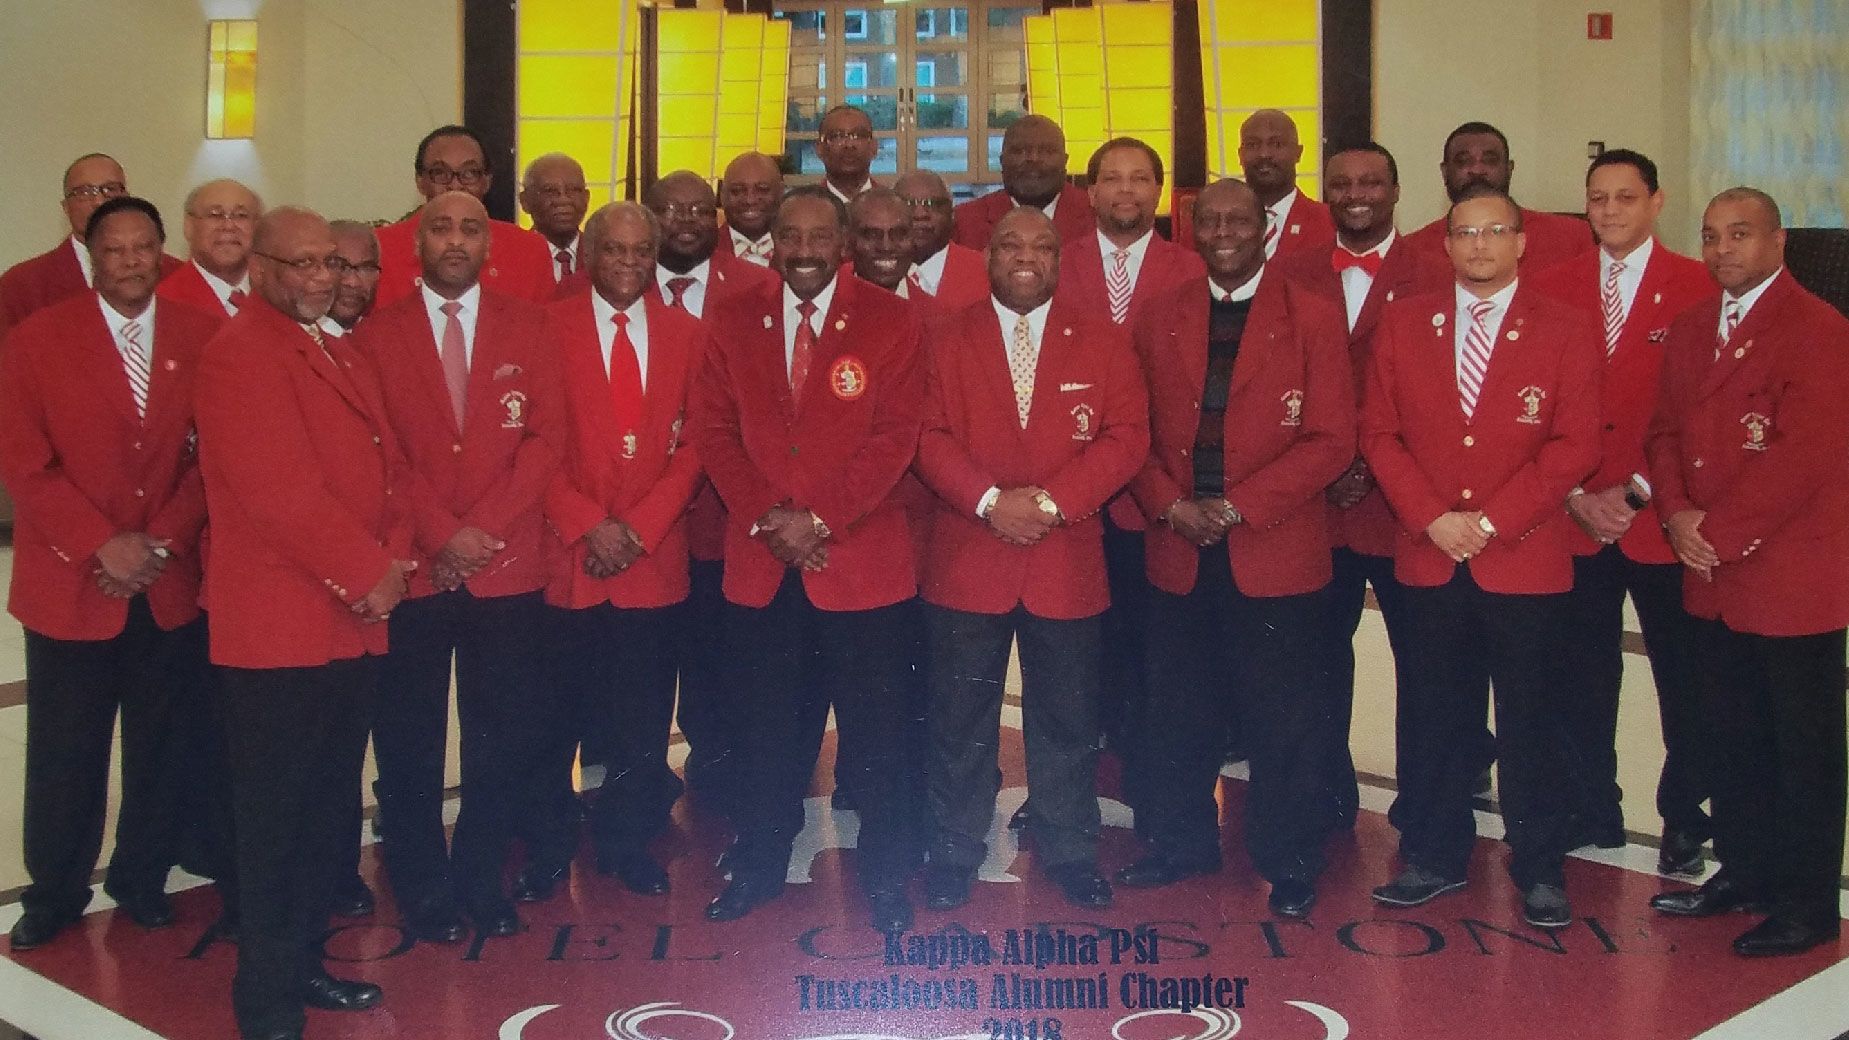 Black fraternity group says Alabama refused host their event, citing 'problems with | CNN